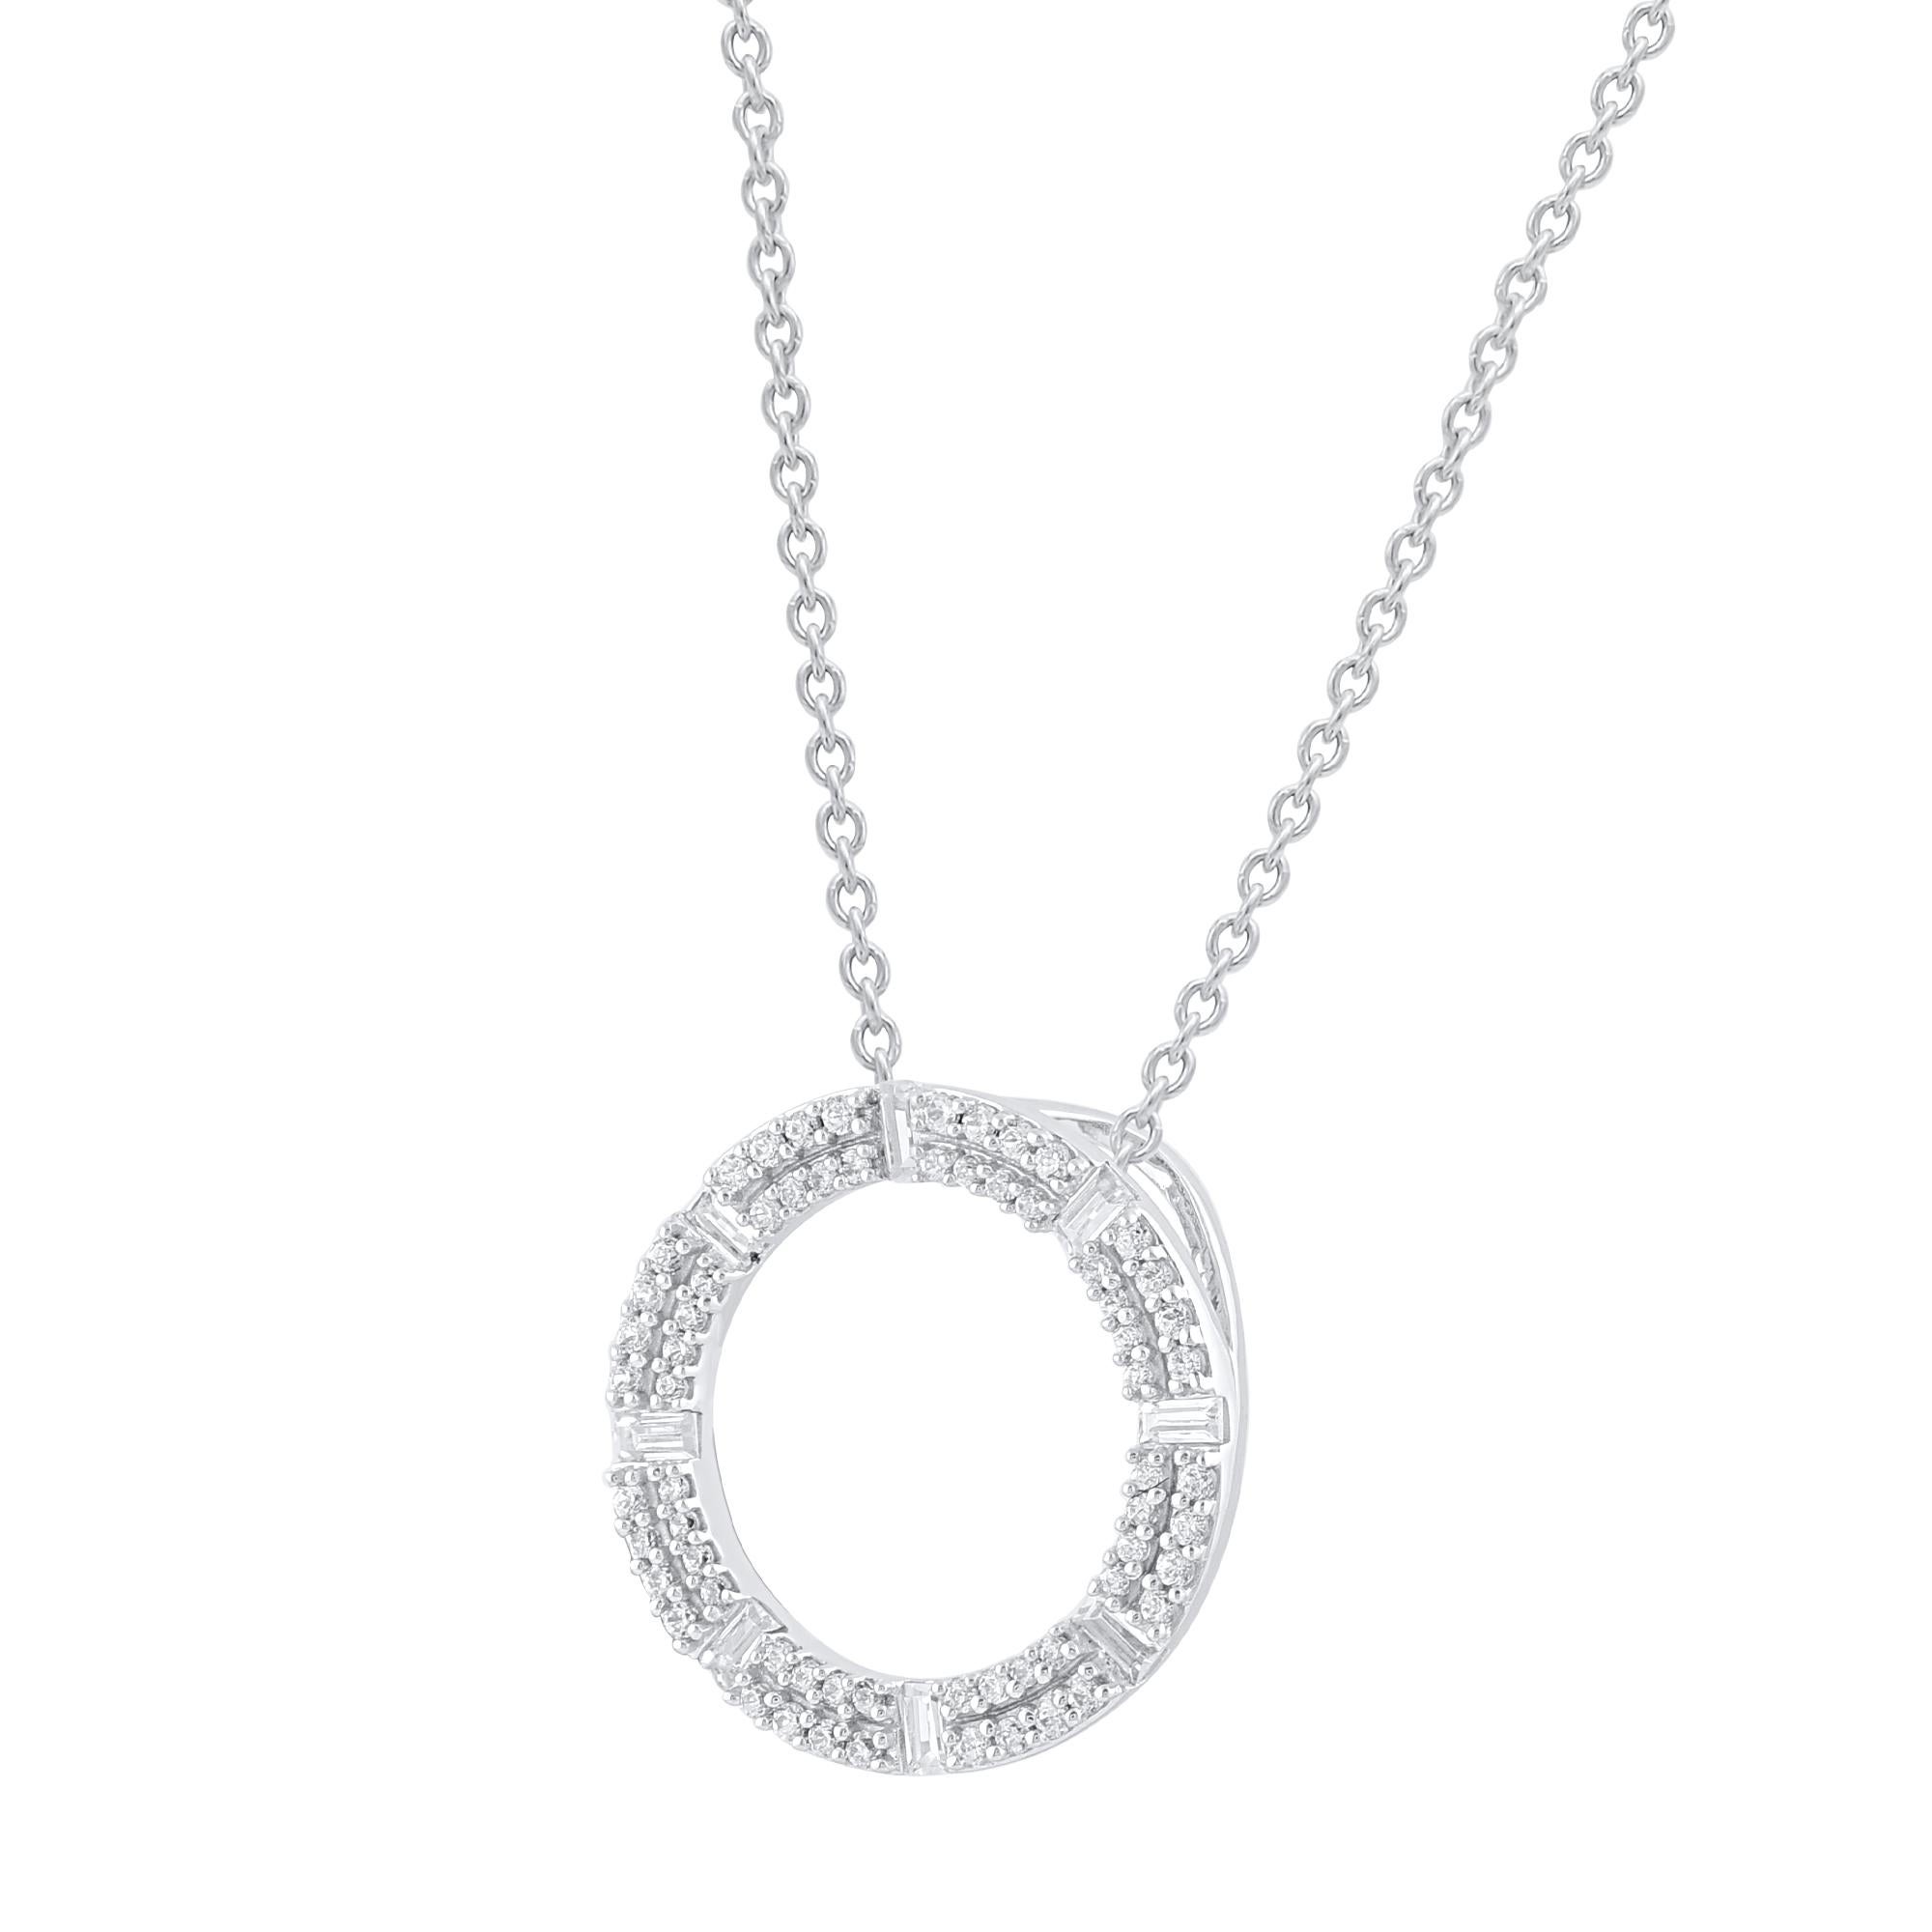 This diamond open circle eternity pendant fits any occasion with ease. These eternity pendant are studded with 72 round and baguette natural diamonds in prong & channel setting in 14kt white gold. Diamonds are graded as H-I color and I-2 clarity.